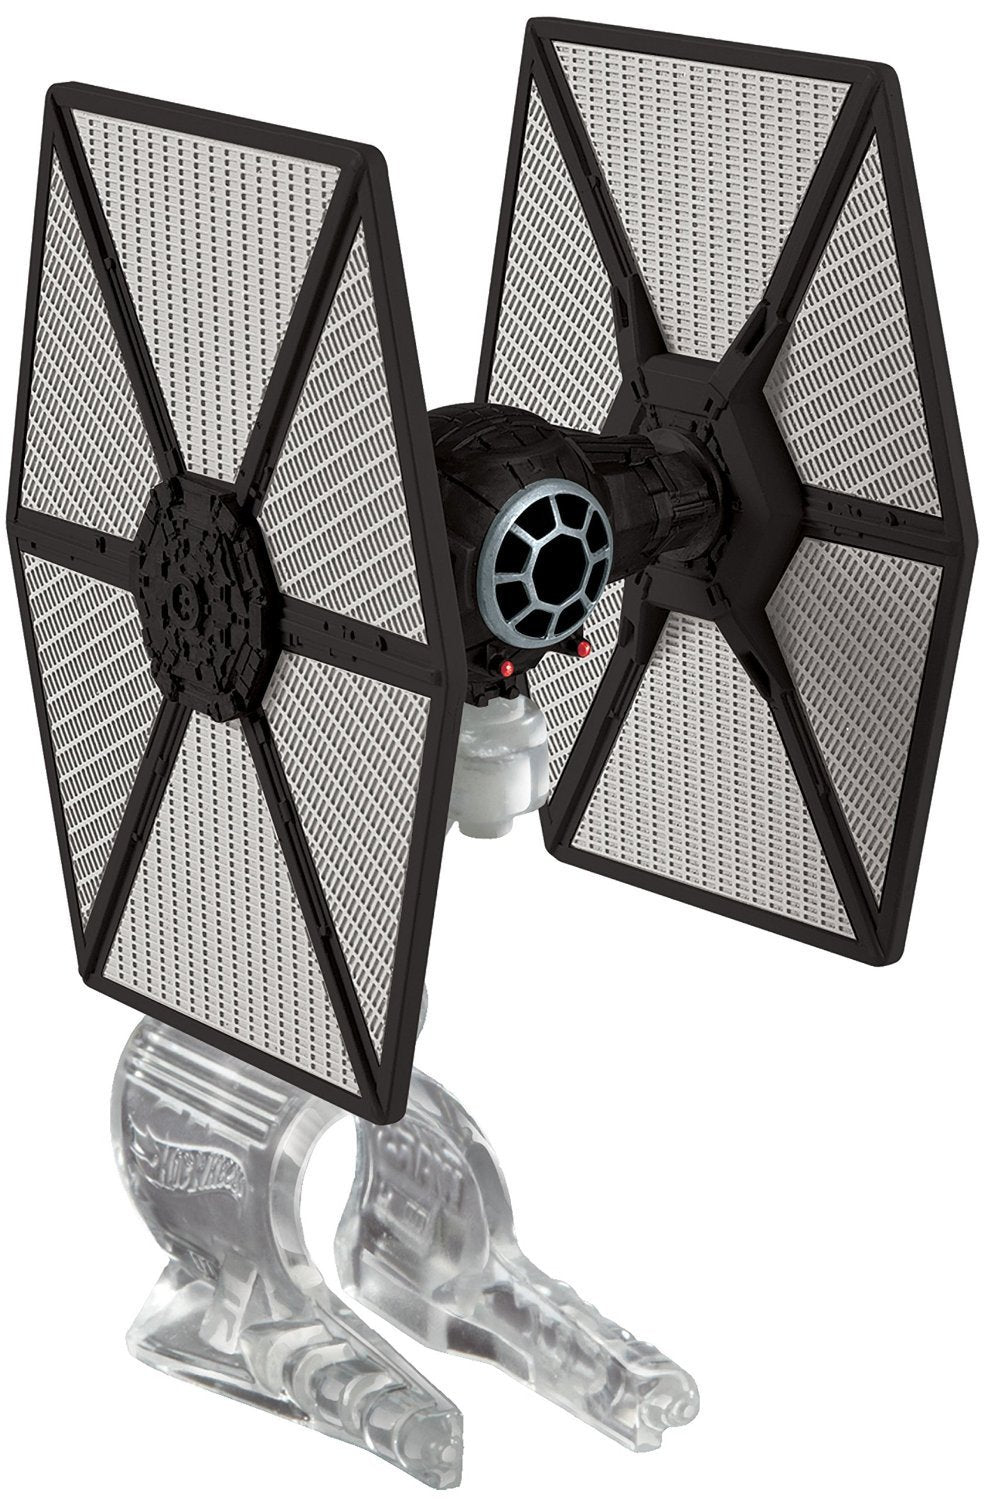 Hot Wheels Star Wars The Force Awakens First Order TIE Fighter Vehicle